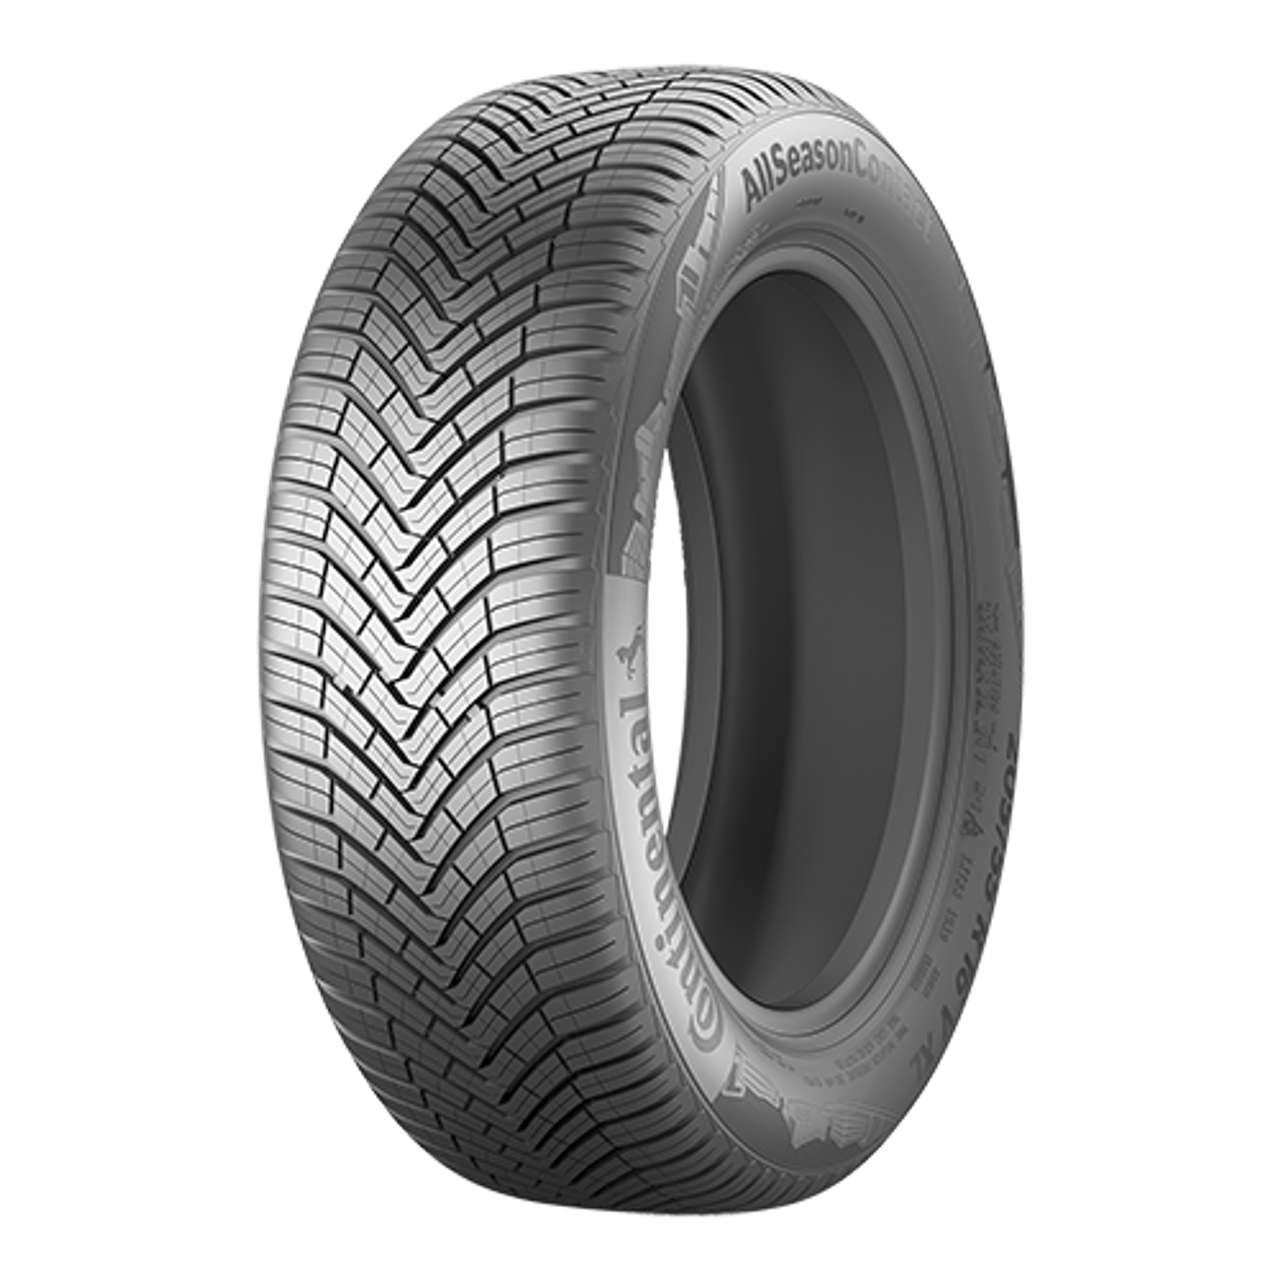 CONTINENTAL ALLSEASONCONTACT (EVc) 215/65R17 99H BSW